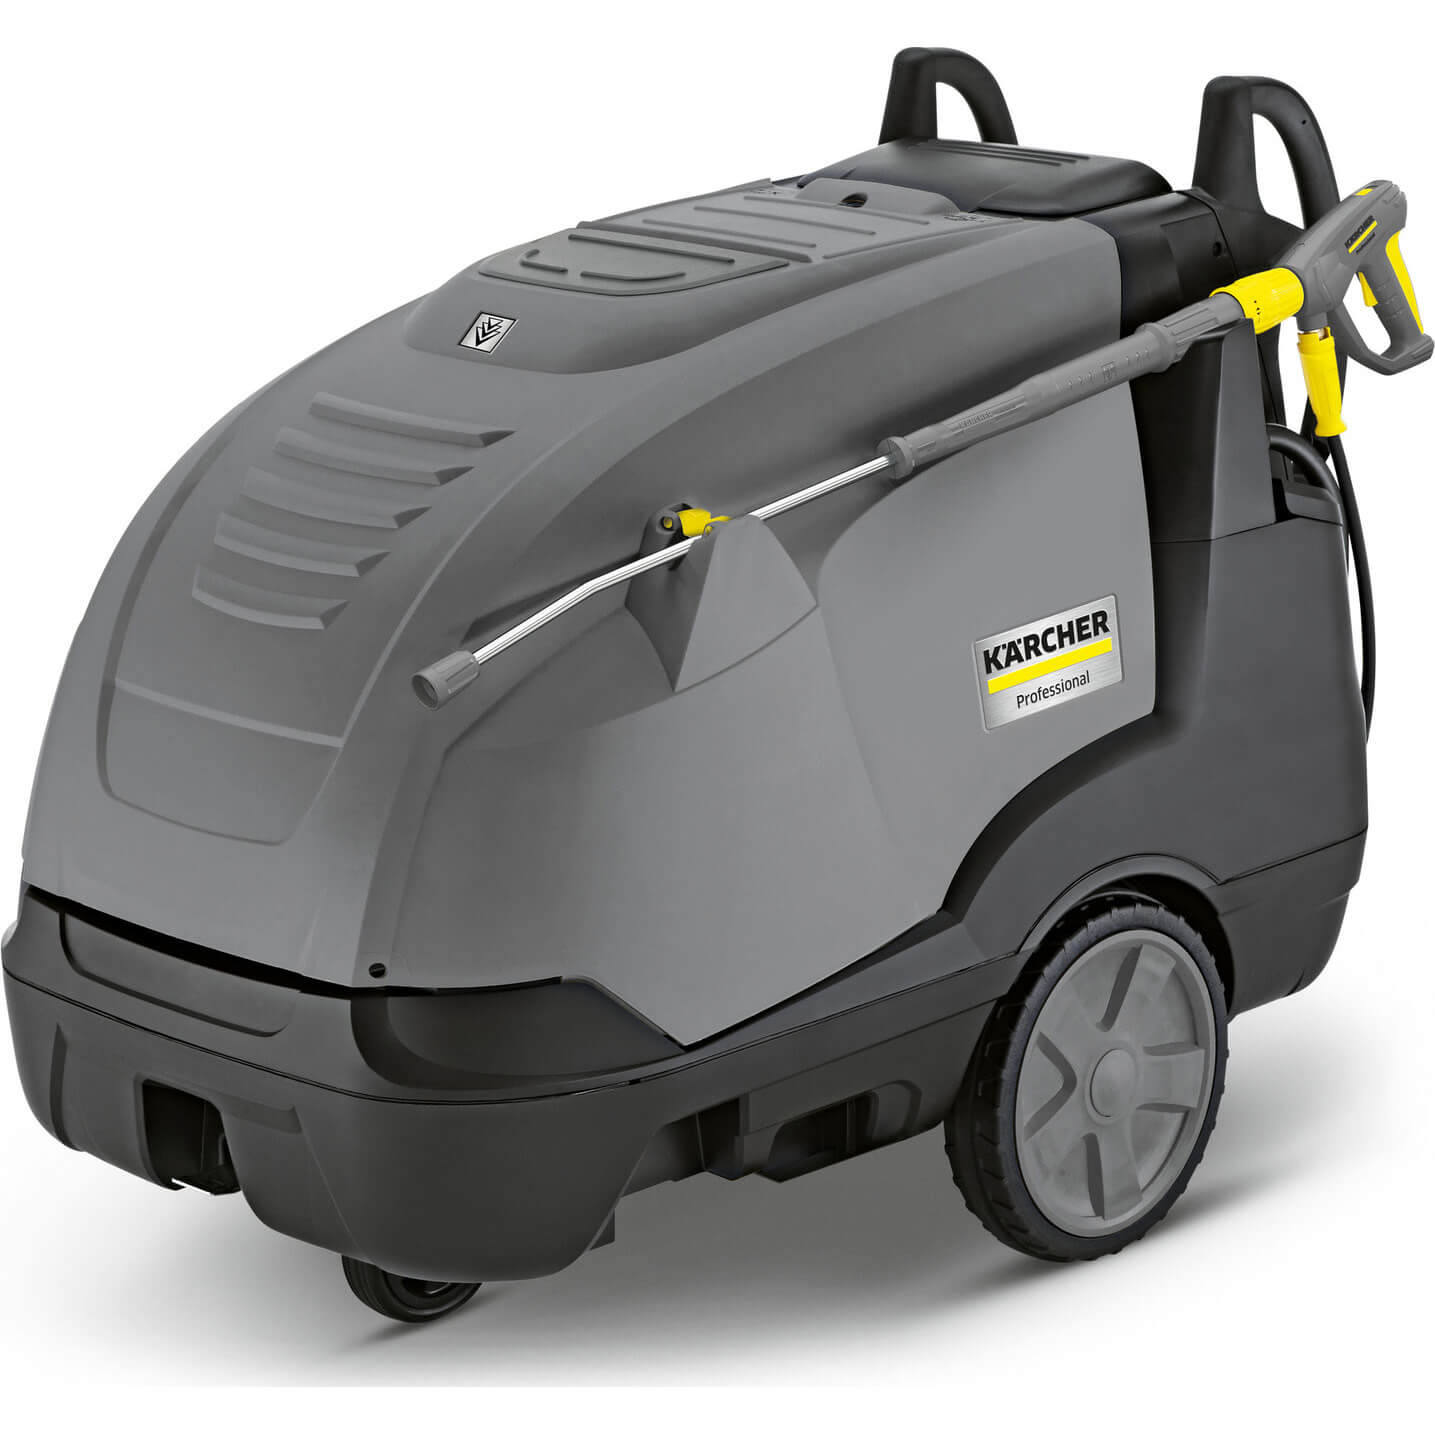 Karcher HDS-E 8/16-4 M 24Kw Professional Hot Water Pressure Washer 160 Bar